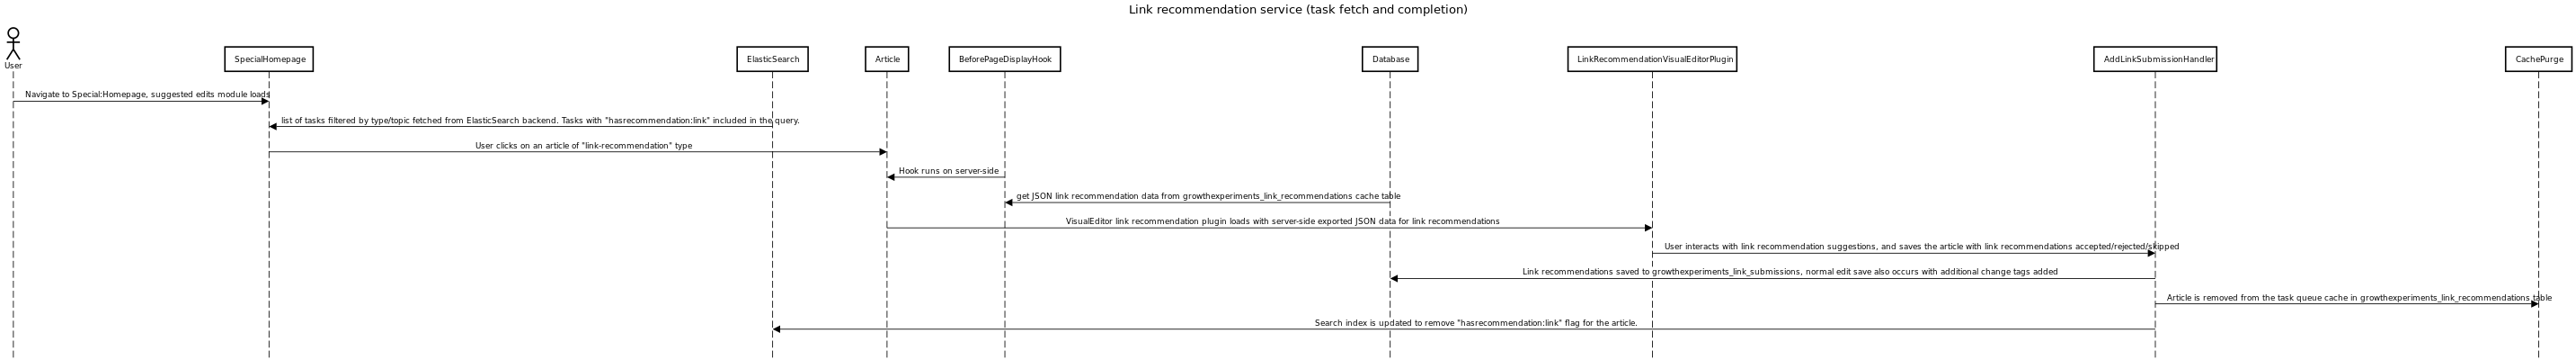 Link recommendation service (task fetch and completion)